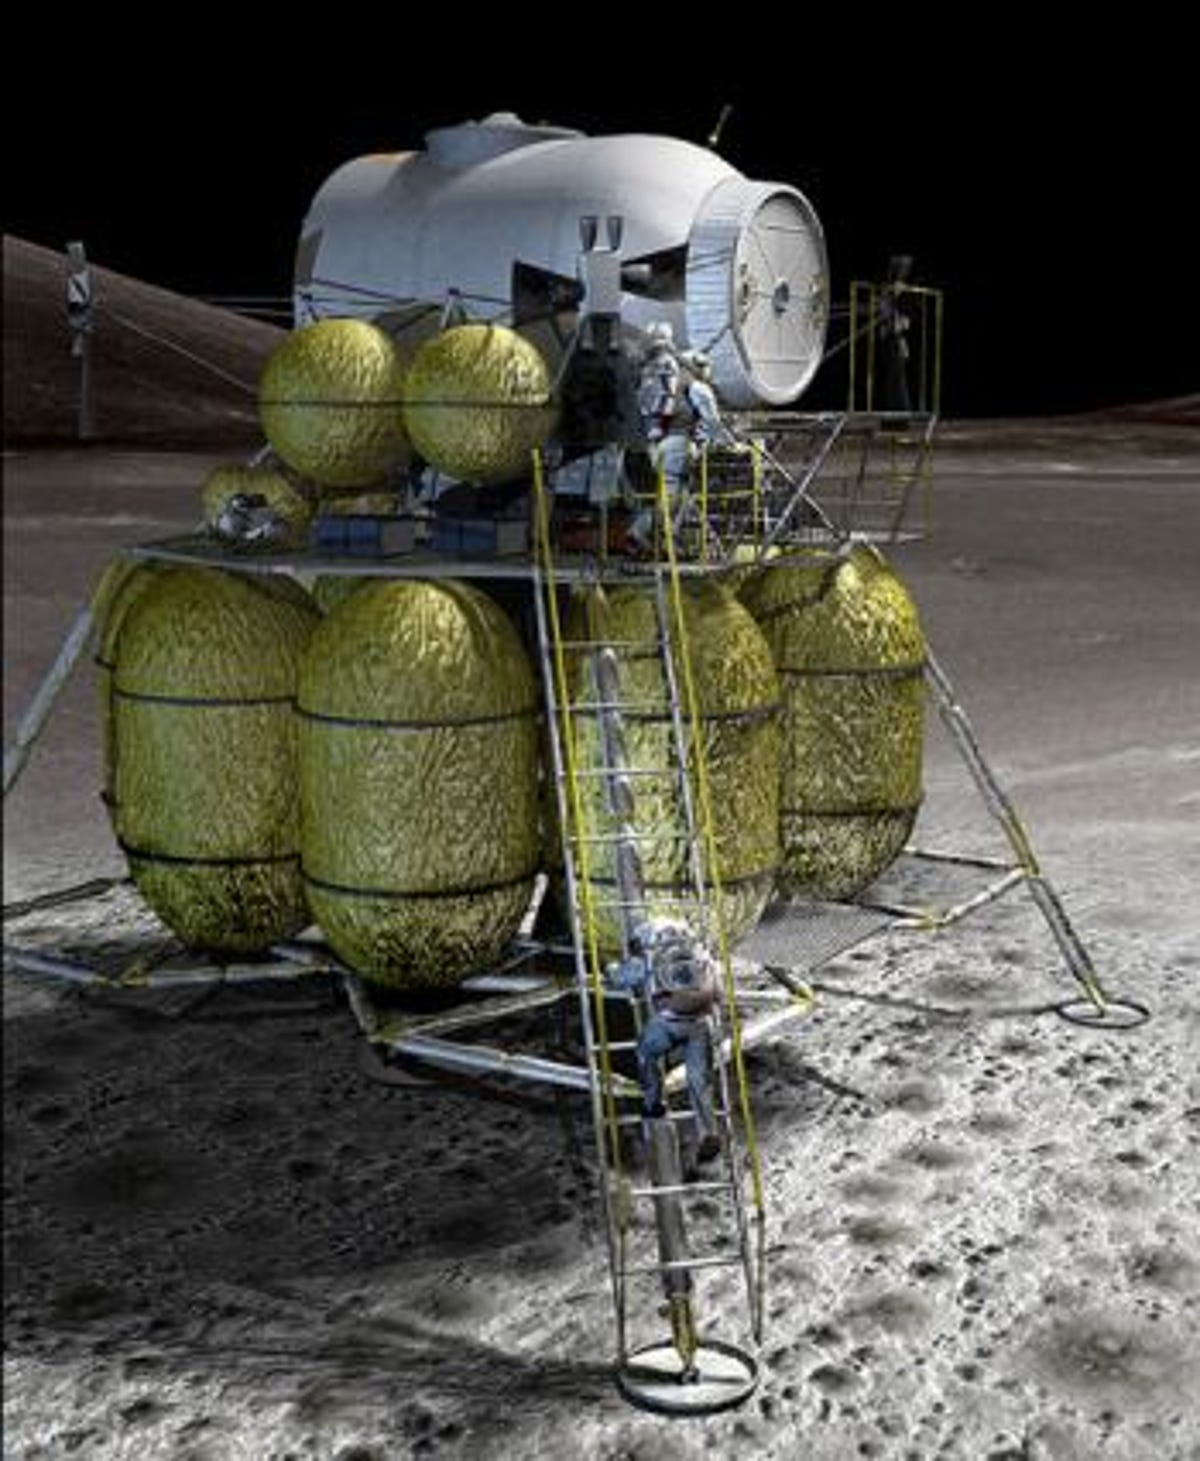 As envisioned, the new lunar lander will have room for four astronauts and supplies for seven days.